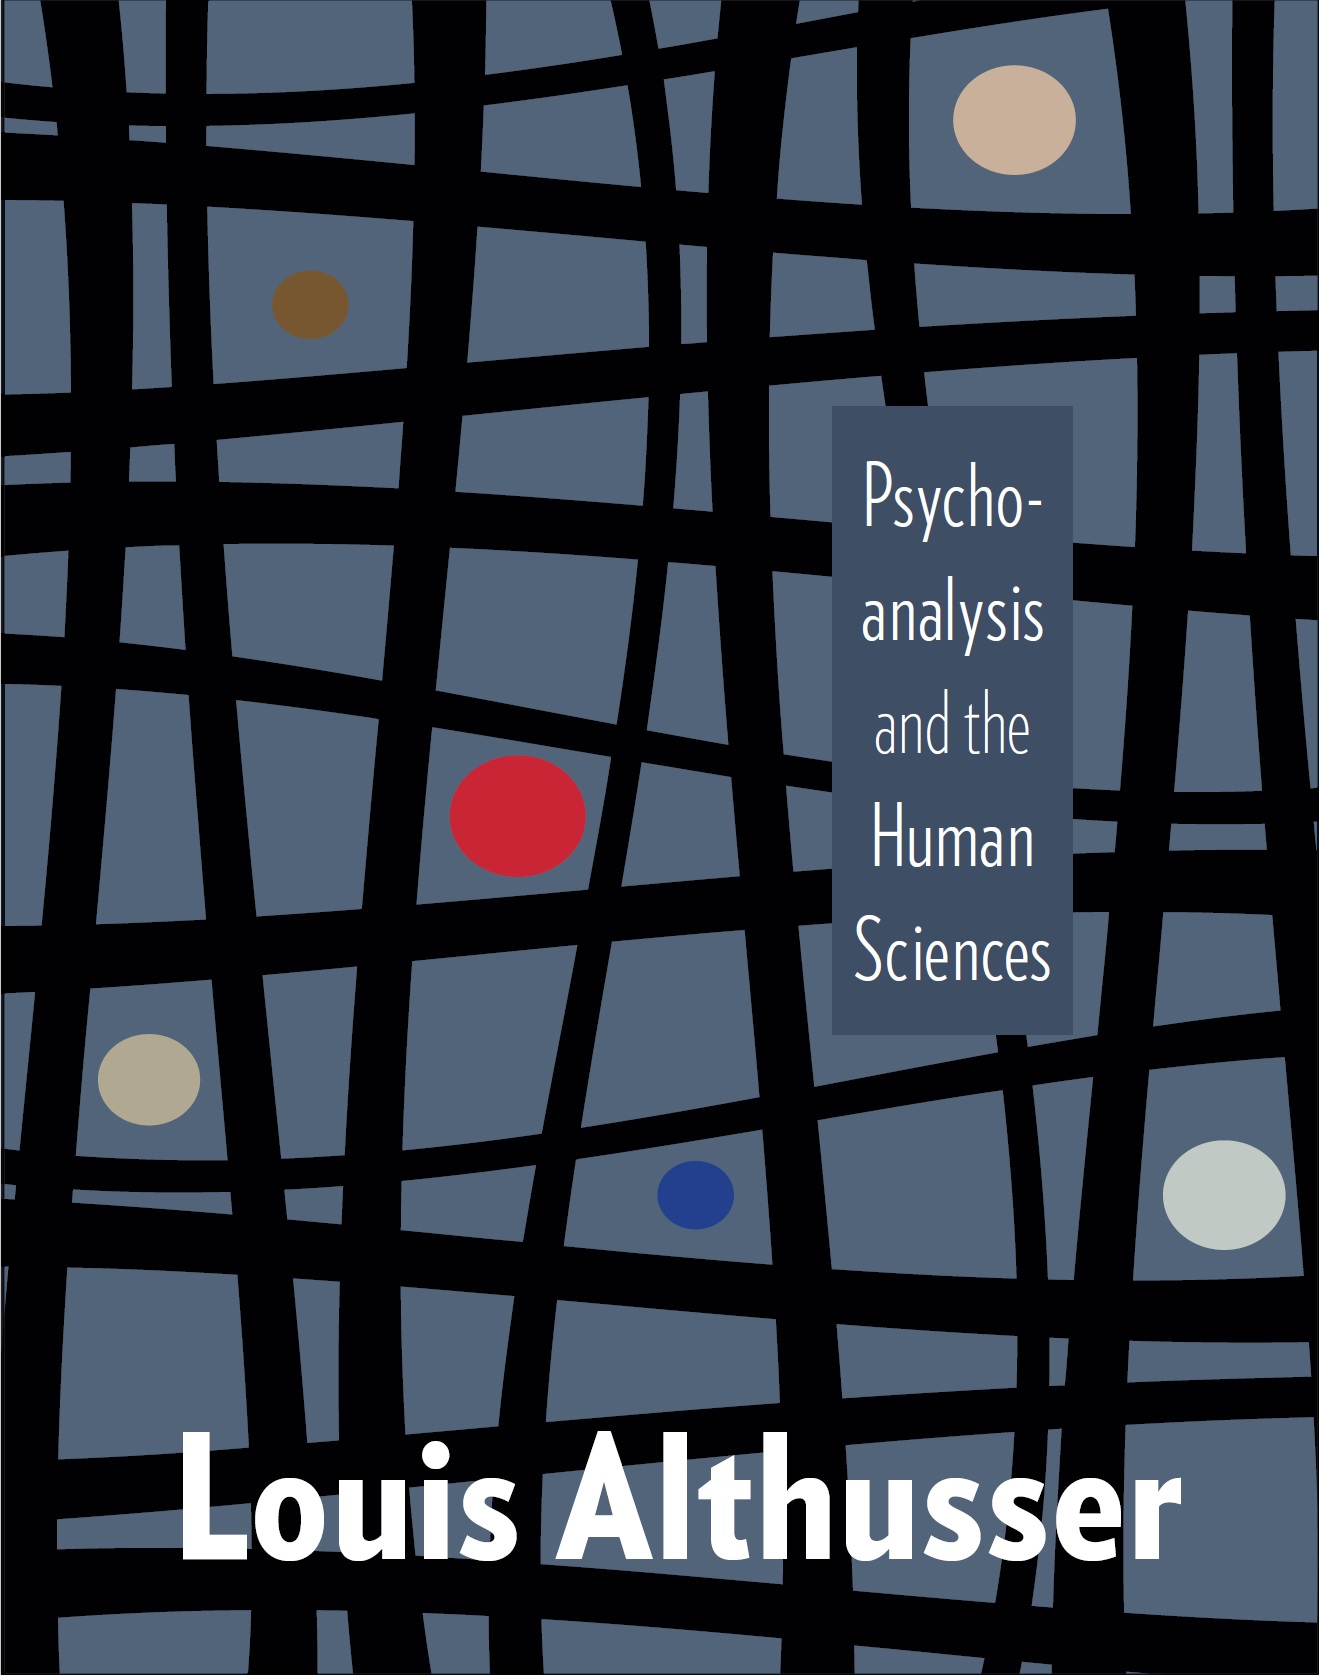 Louis-althusser-psychoanalysis-and-the-human-sciences-theoryleaks.jpg